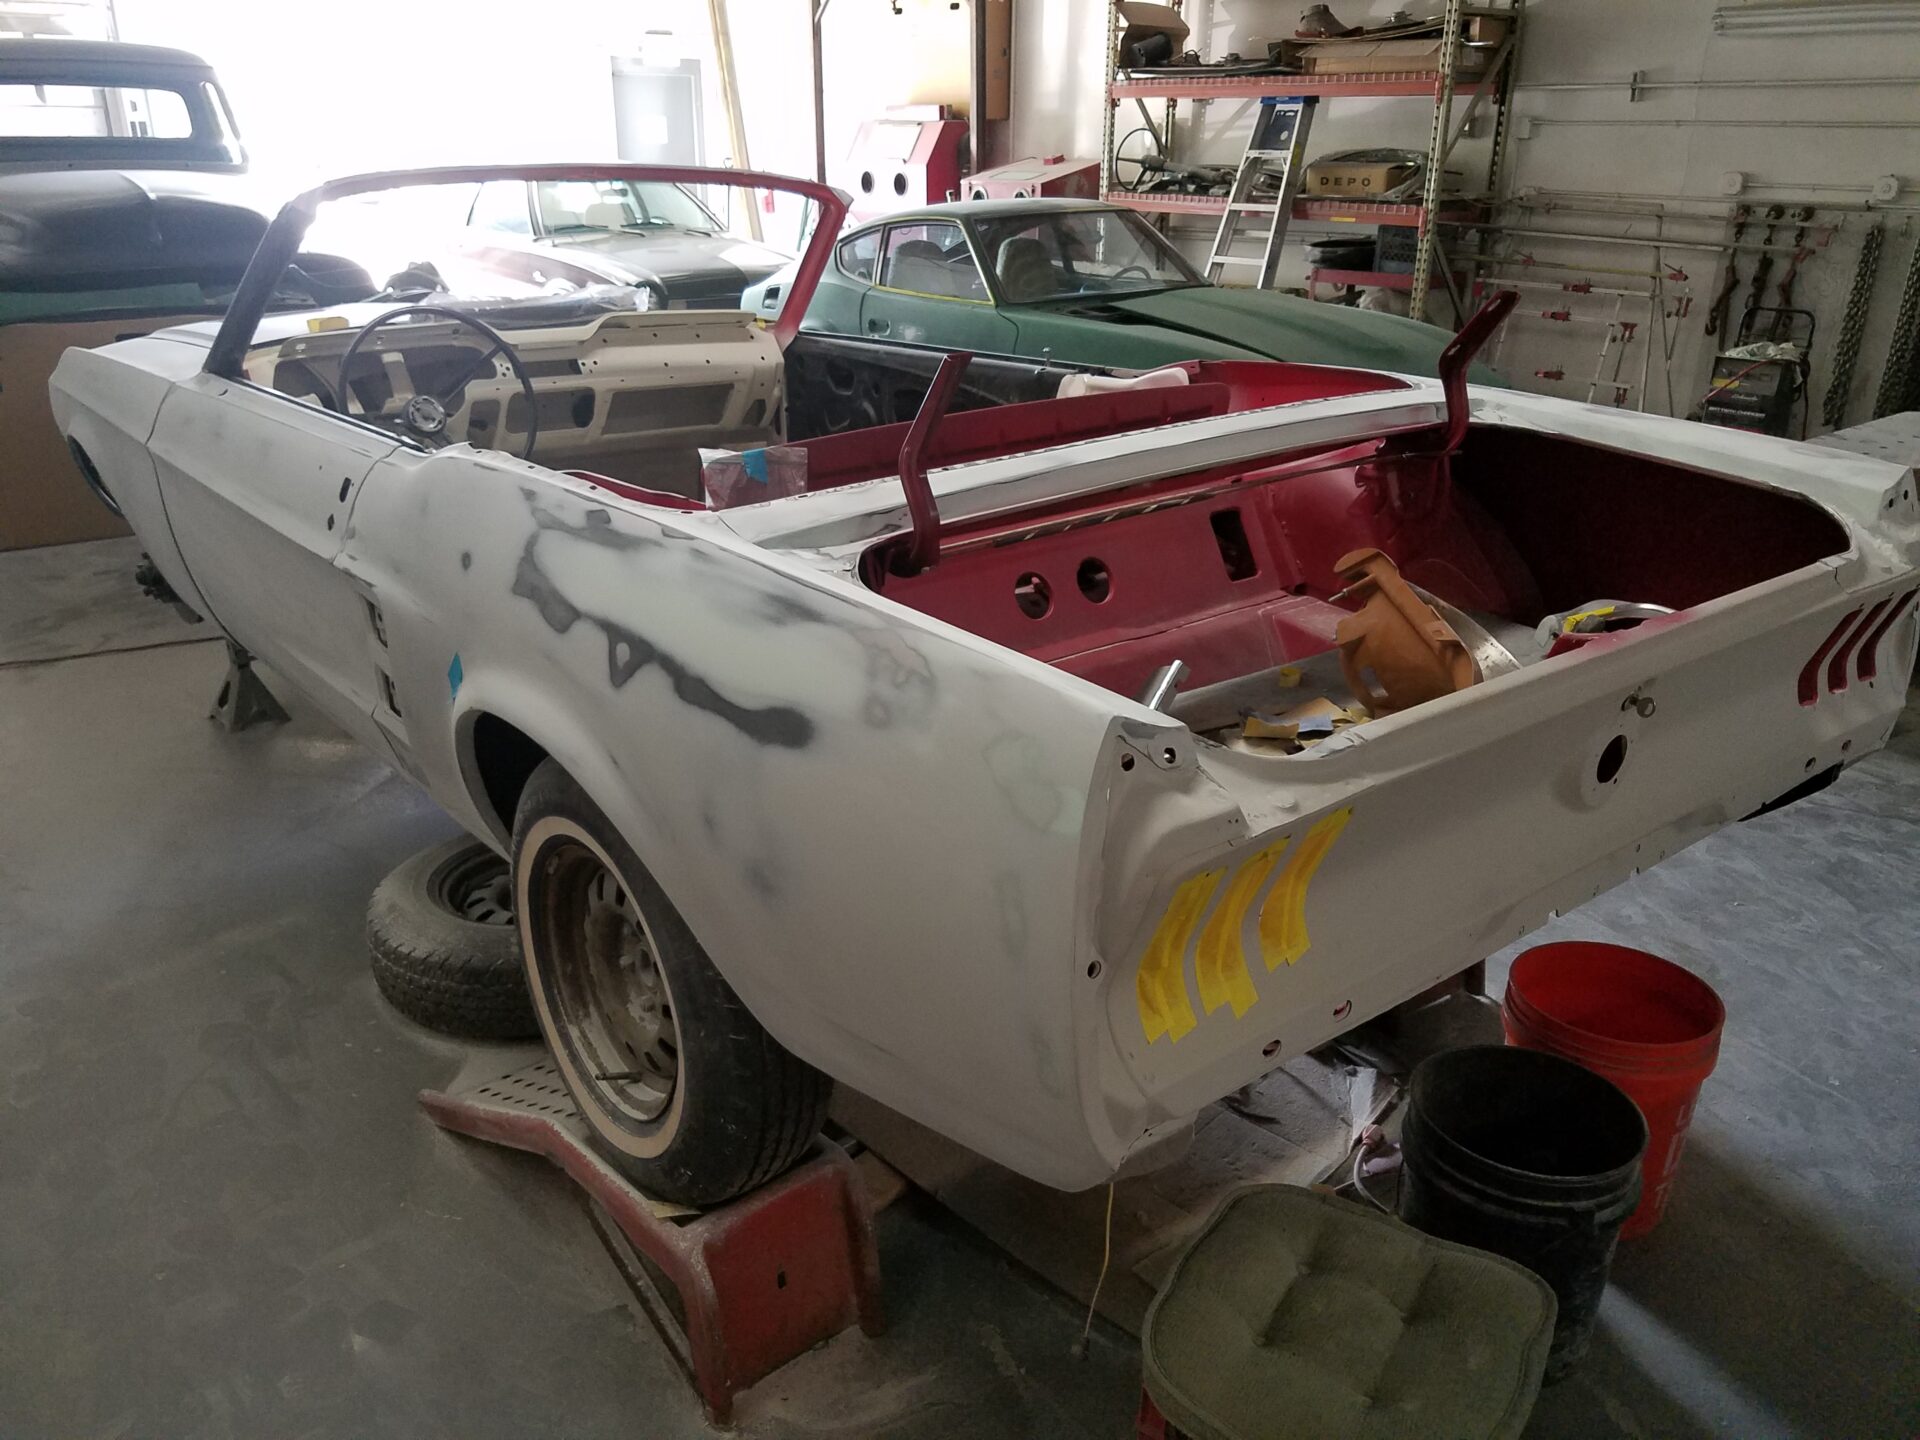 A white 1967 Ford Mustang Convertible undergoing repairs